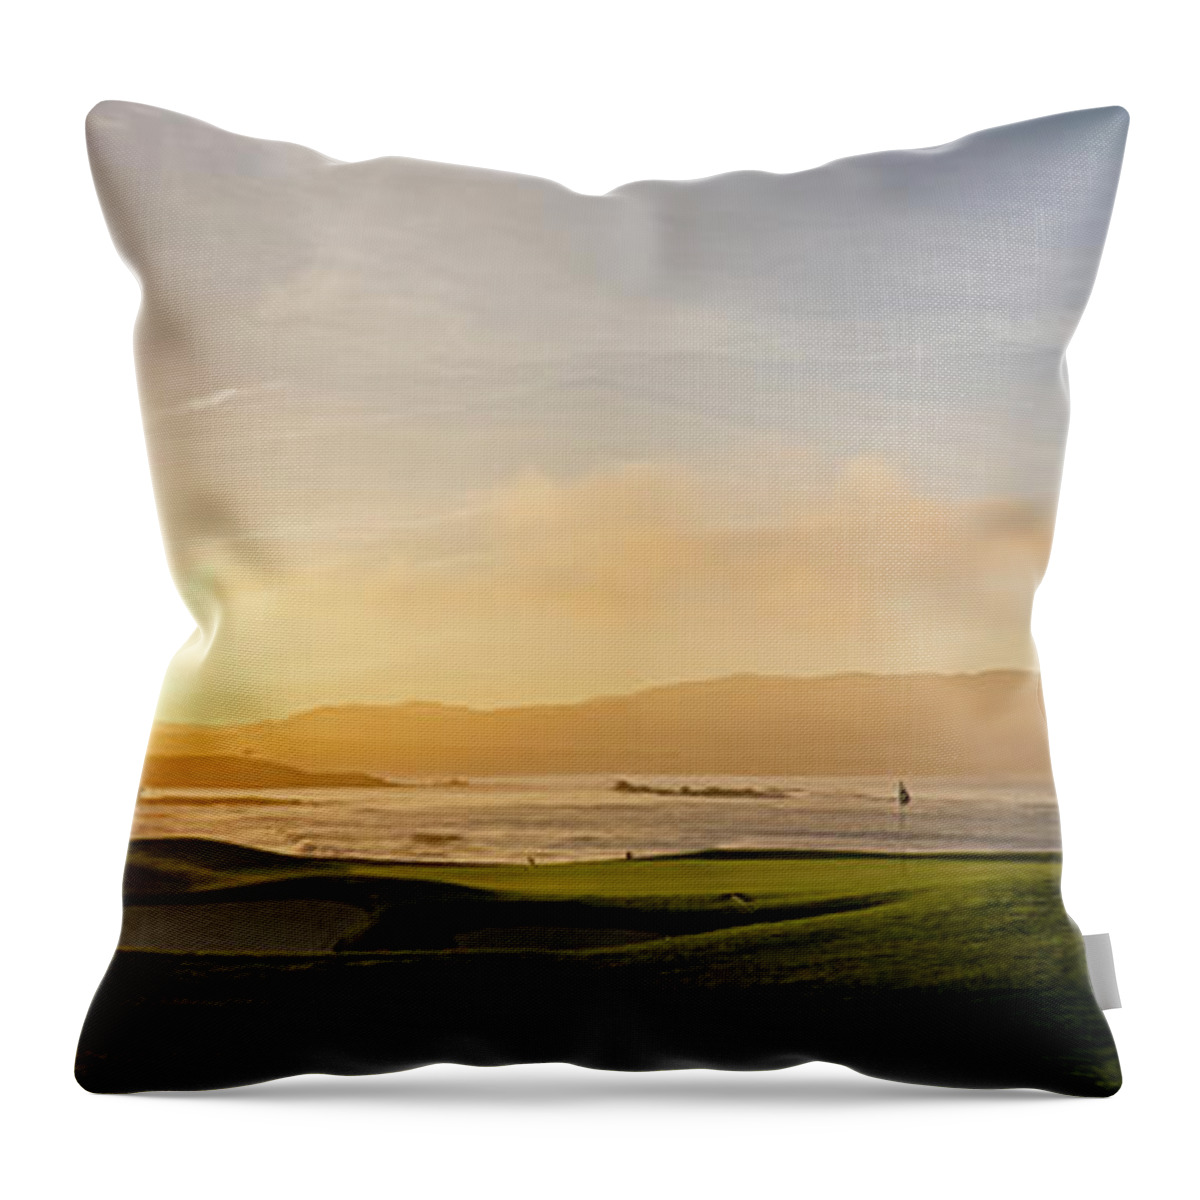 Photography Throw Pillow featuring the photograph 18th Hole With Iconic Cypress Tree #2 by Panoramic Images